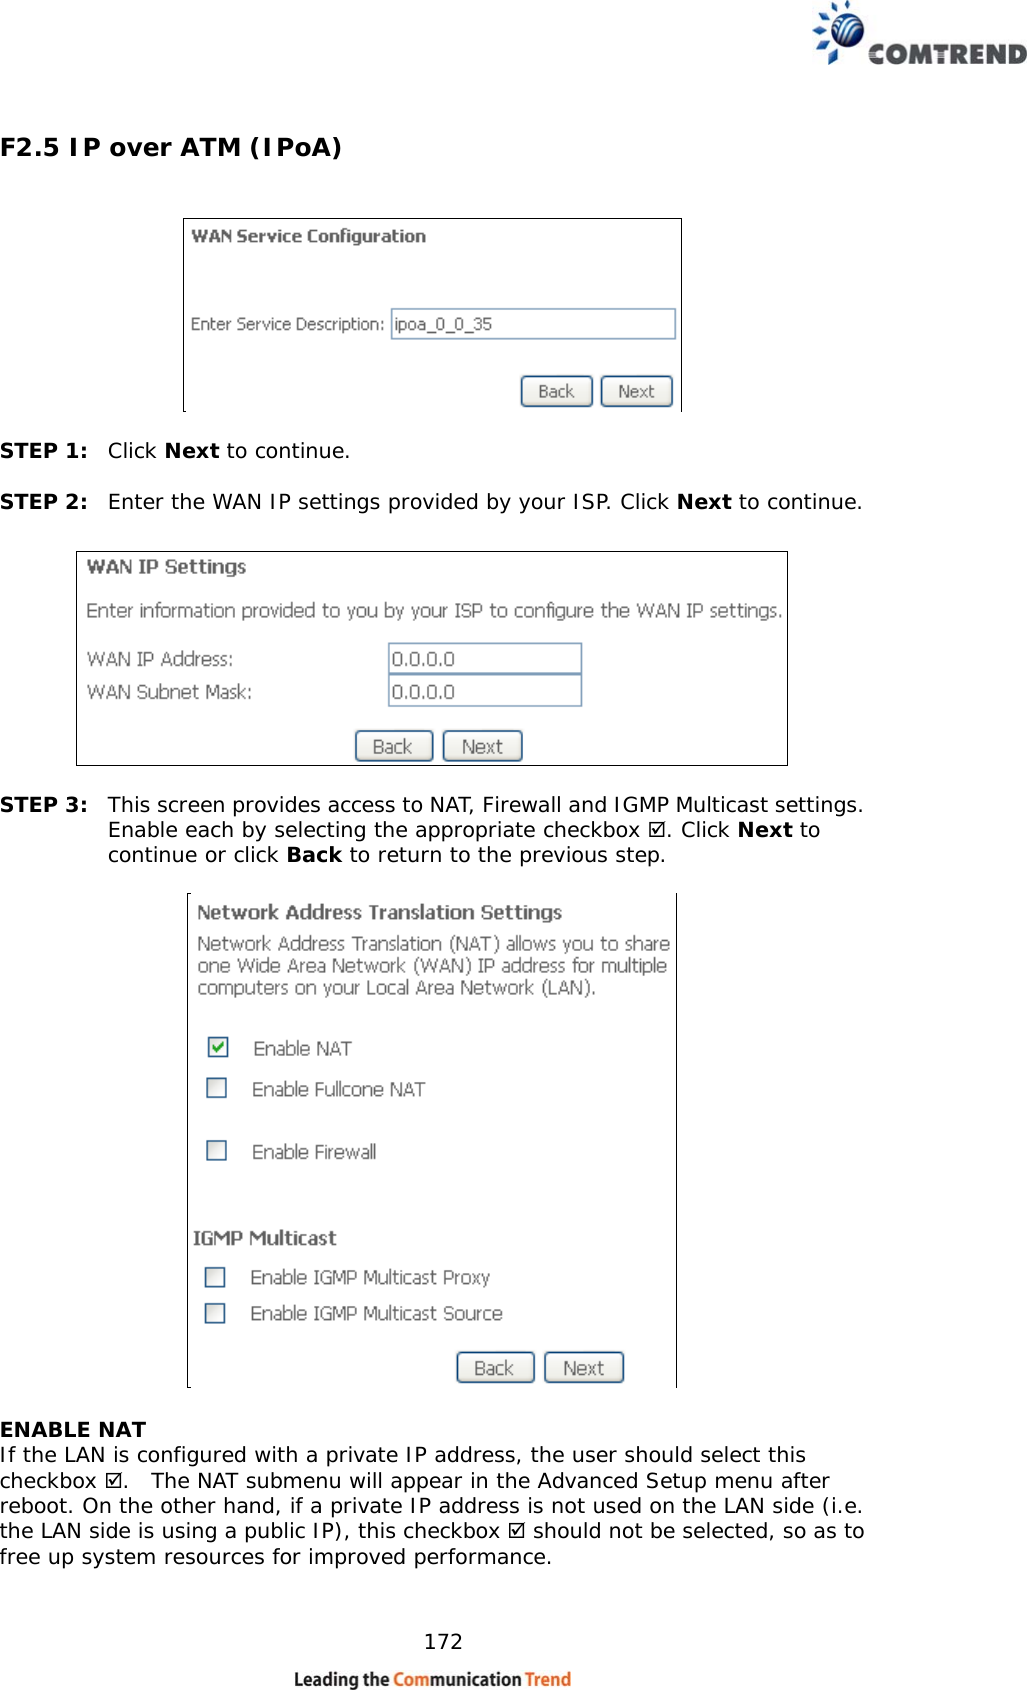    172 F2.5 IP over ATM (IPoA)    STEP 1:  Click Next to continue.  STEP 2:  Enter the WAN IP settings provided by your ISP. Click Next to continue.    STEP 3:  This screen provides access to NAT, Firewall and IGMP Multicast settings. Enable each by selecting the appropriate checkbox . Click Next to continue or click Back to return to the previous step.   ENABLE NAT If the LAN is configured with a private IP address, the user should select this checkbox .  The NAT submenu will appear in the Advanced Setup menu after reboot. On the other hand, if a private IP address is not used on the LAN side (i.e. the LAN side is using a public IP), this checkbox  should not be selected, so as to free up system resources for improved performance. 